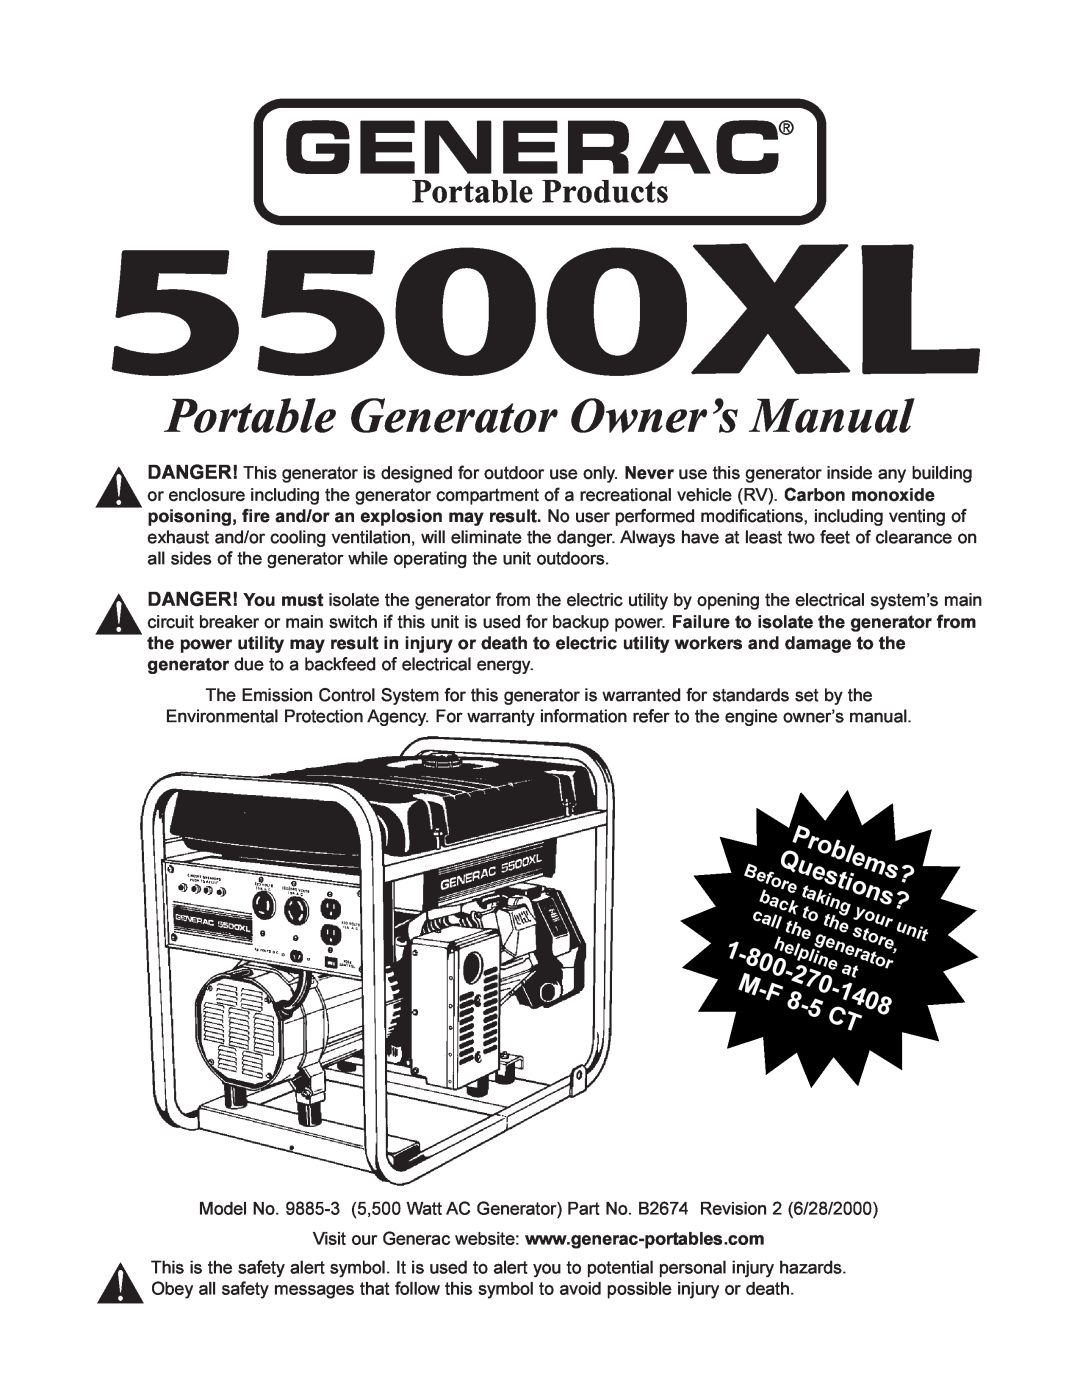 Generac 5500XL manual Portable Generator Owner’s Manual, 1408, Problems?, Questions?, back taking, call the, Before 